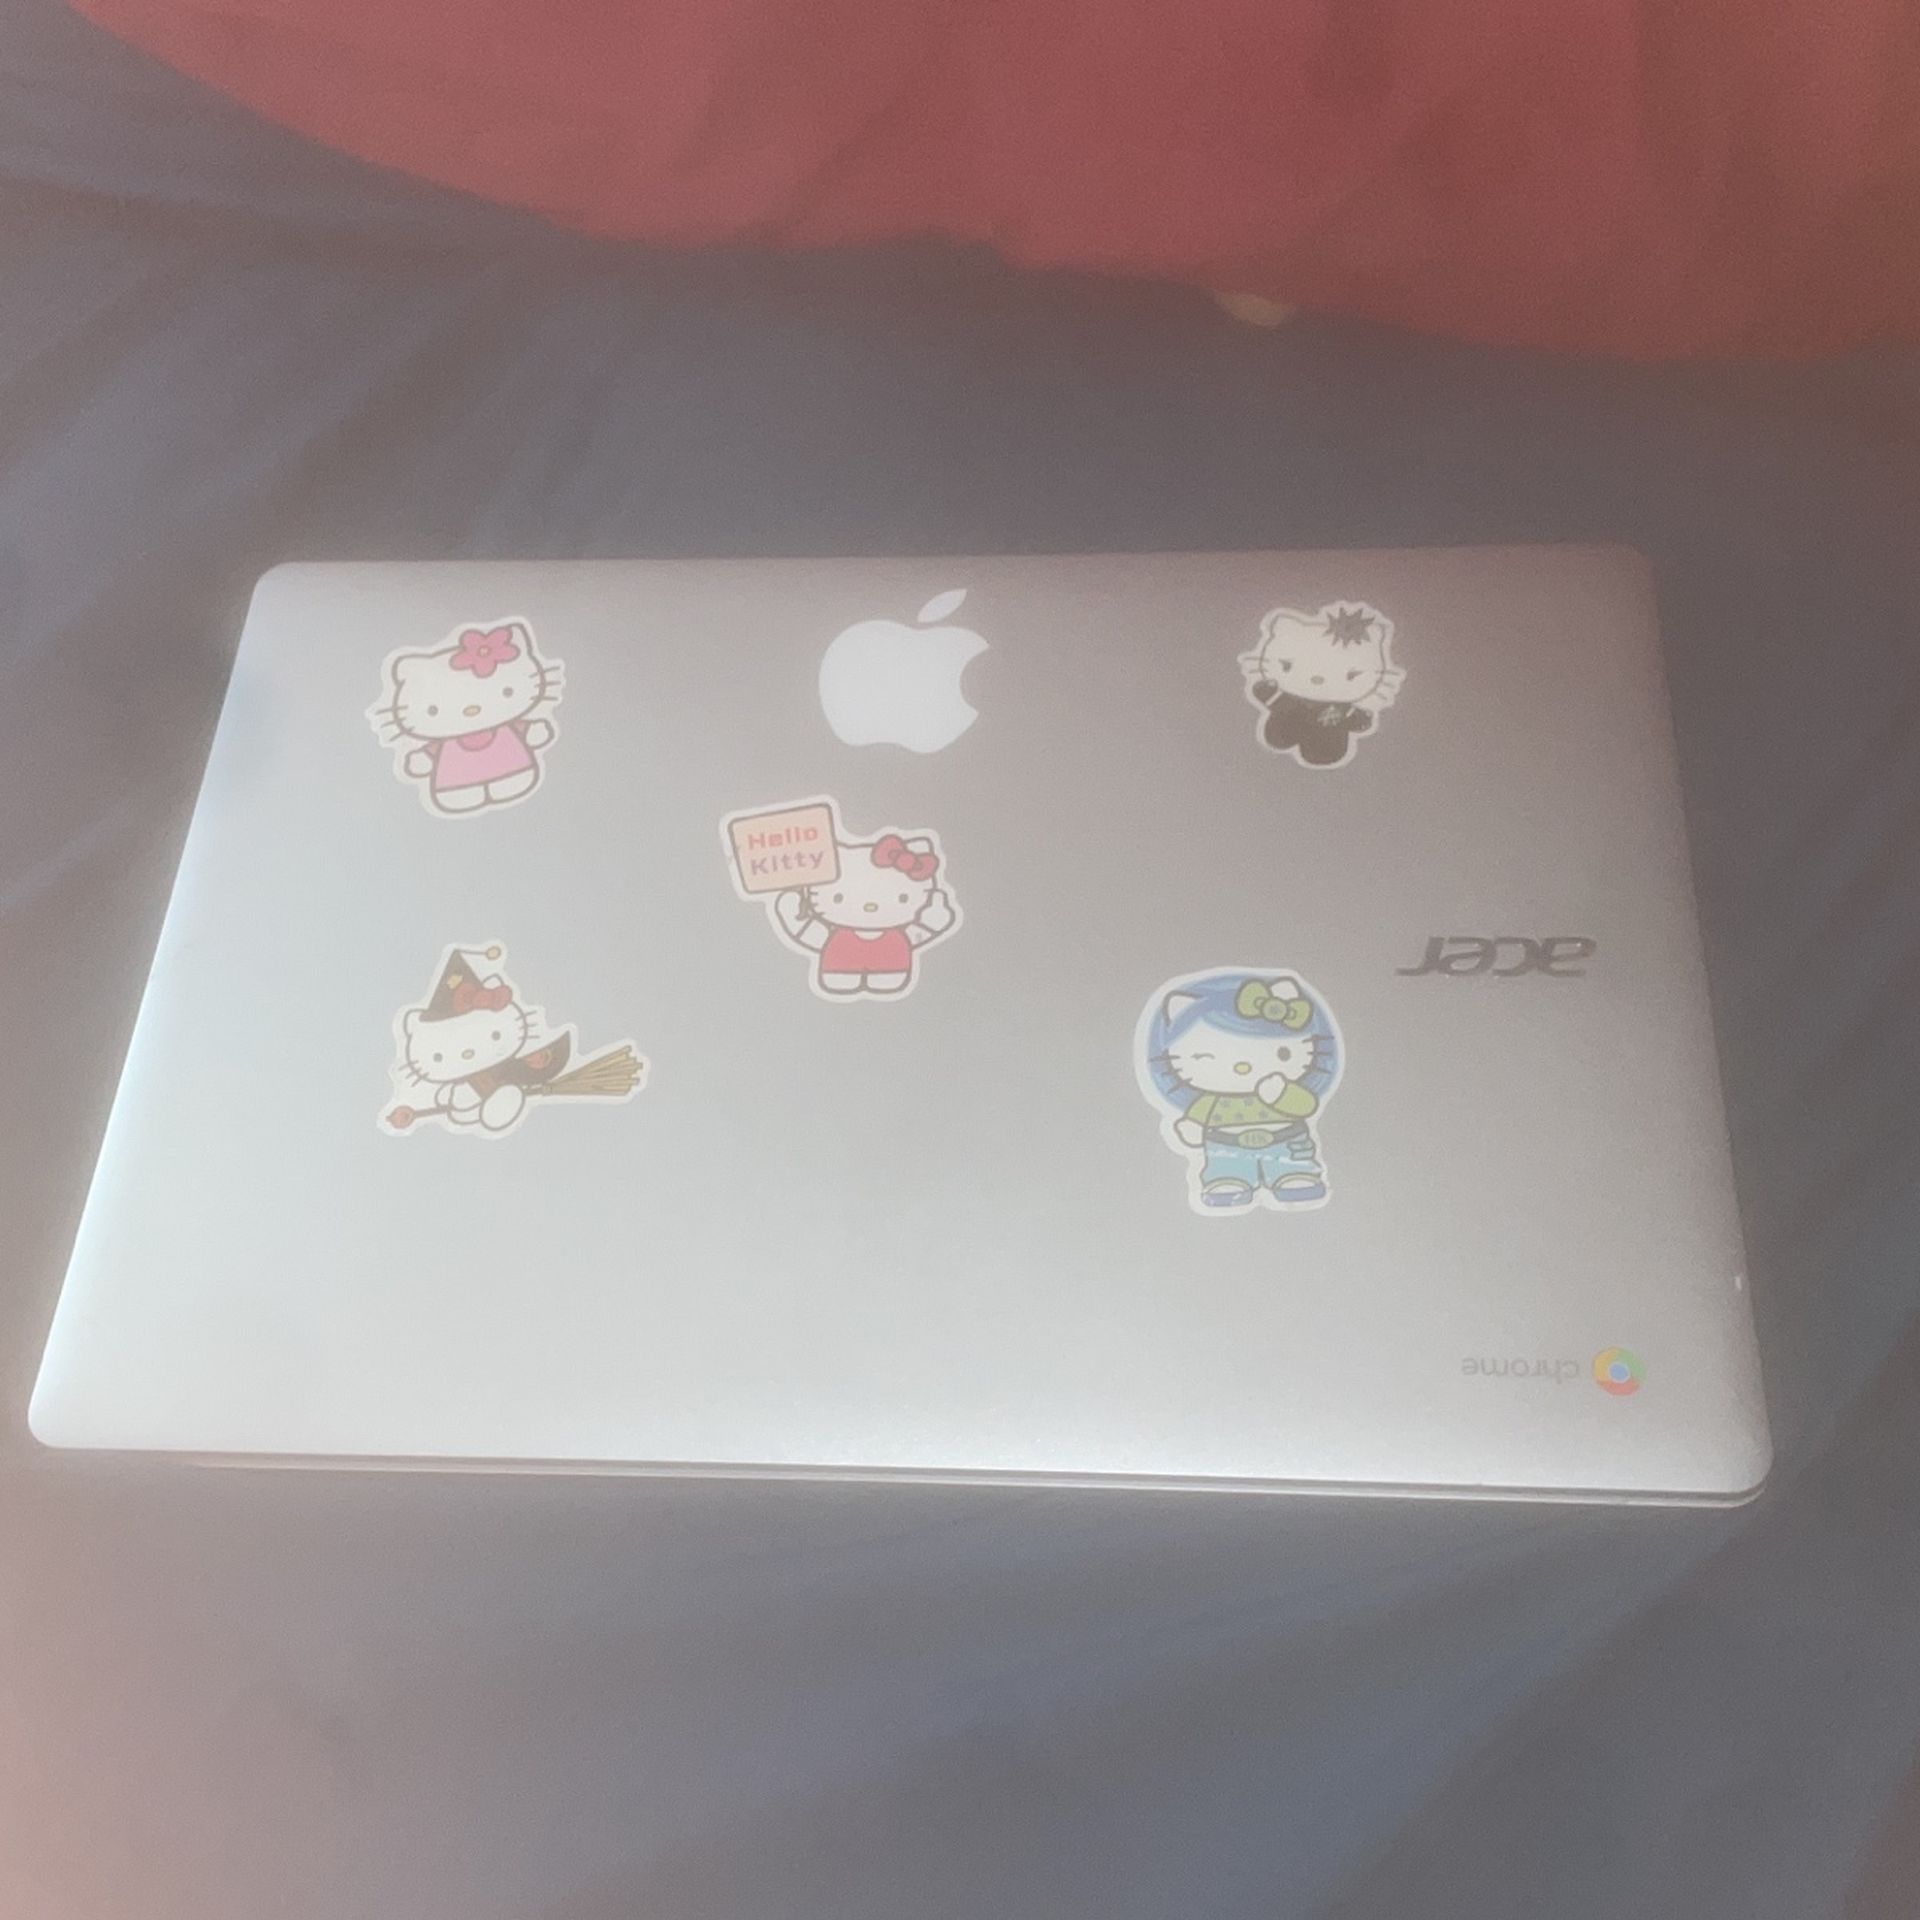 Hello Kitty Sticker Acer Chrome Book Great Condition And Will Take The Stickers Off If Wanted.